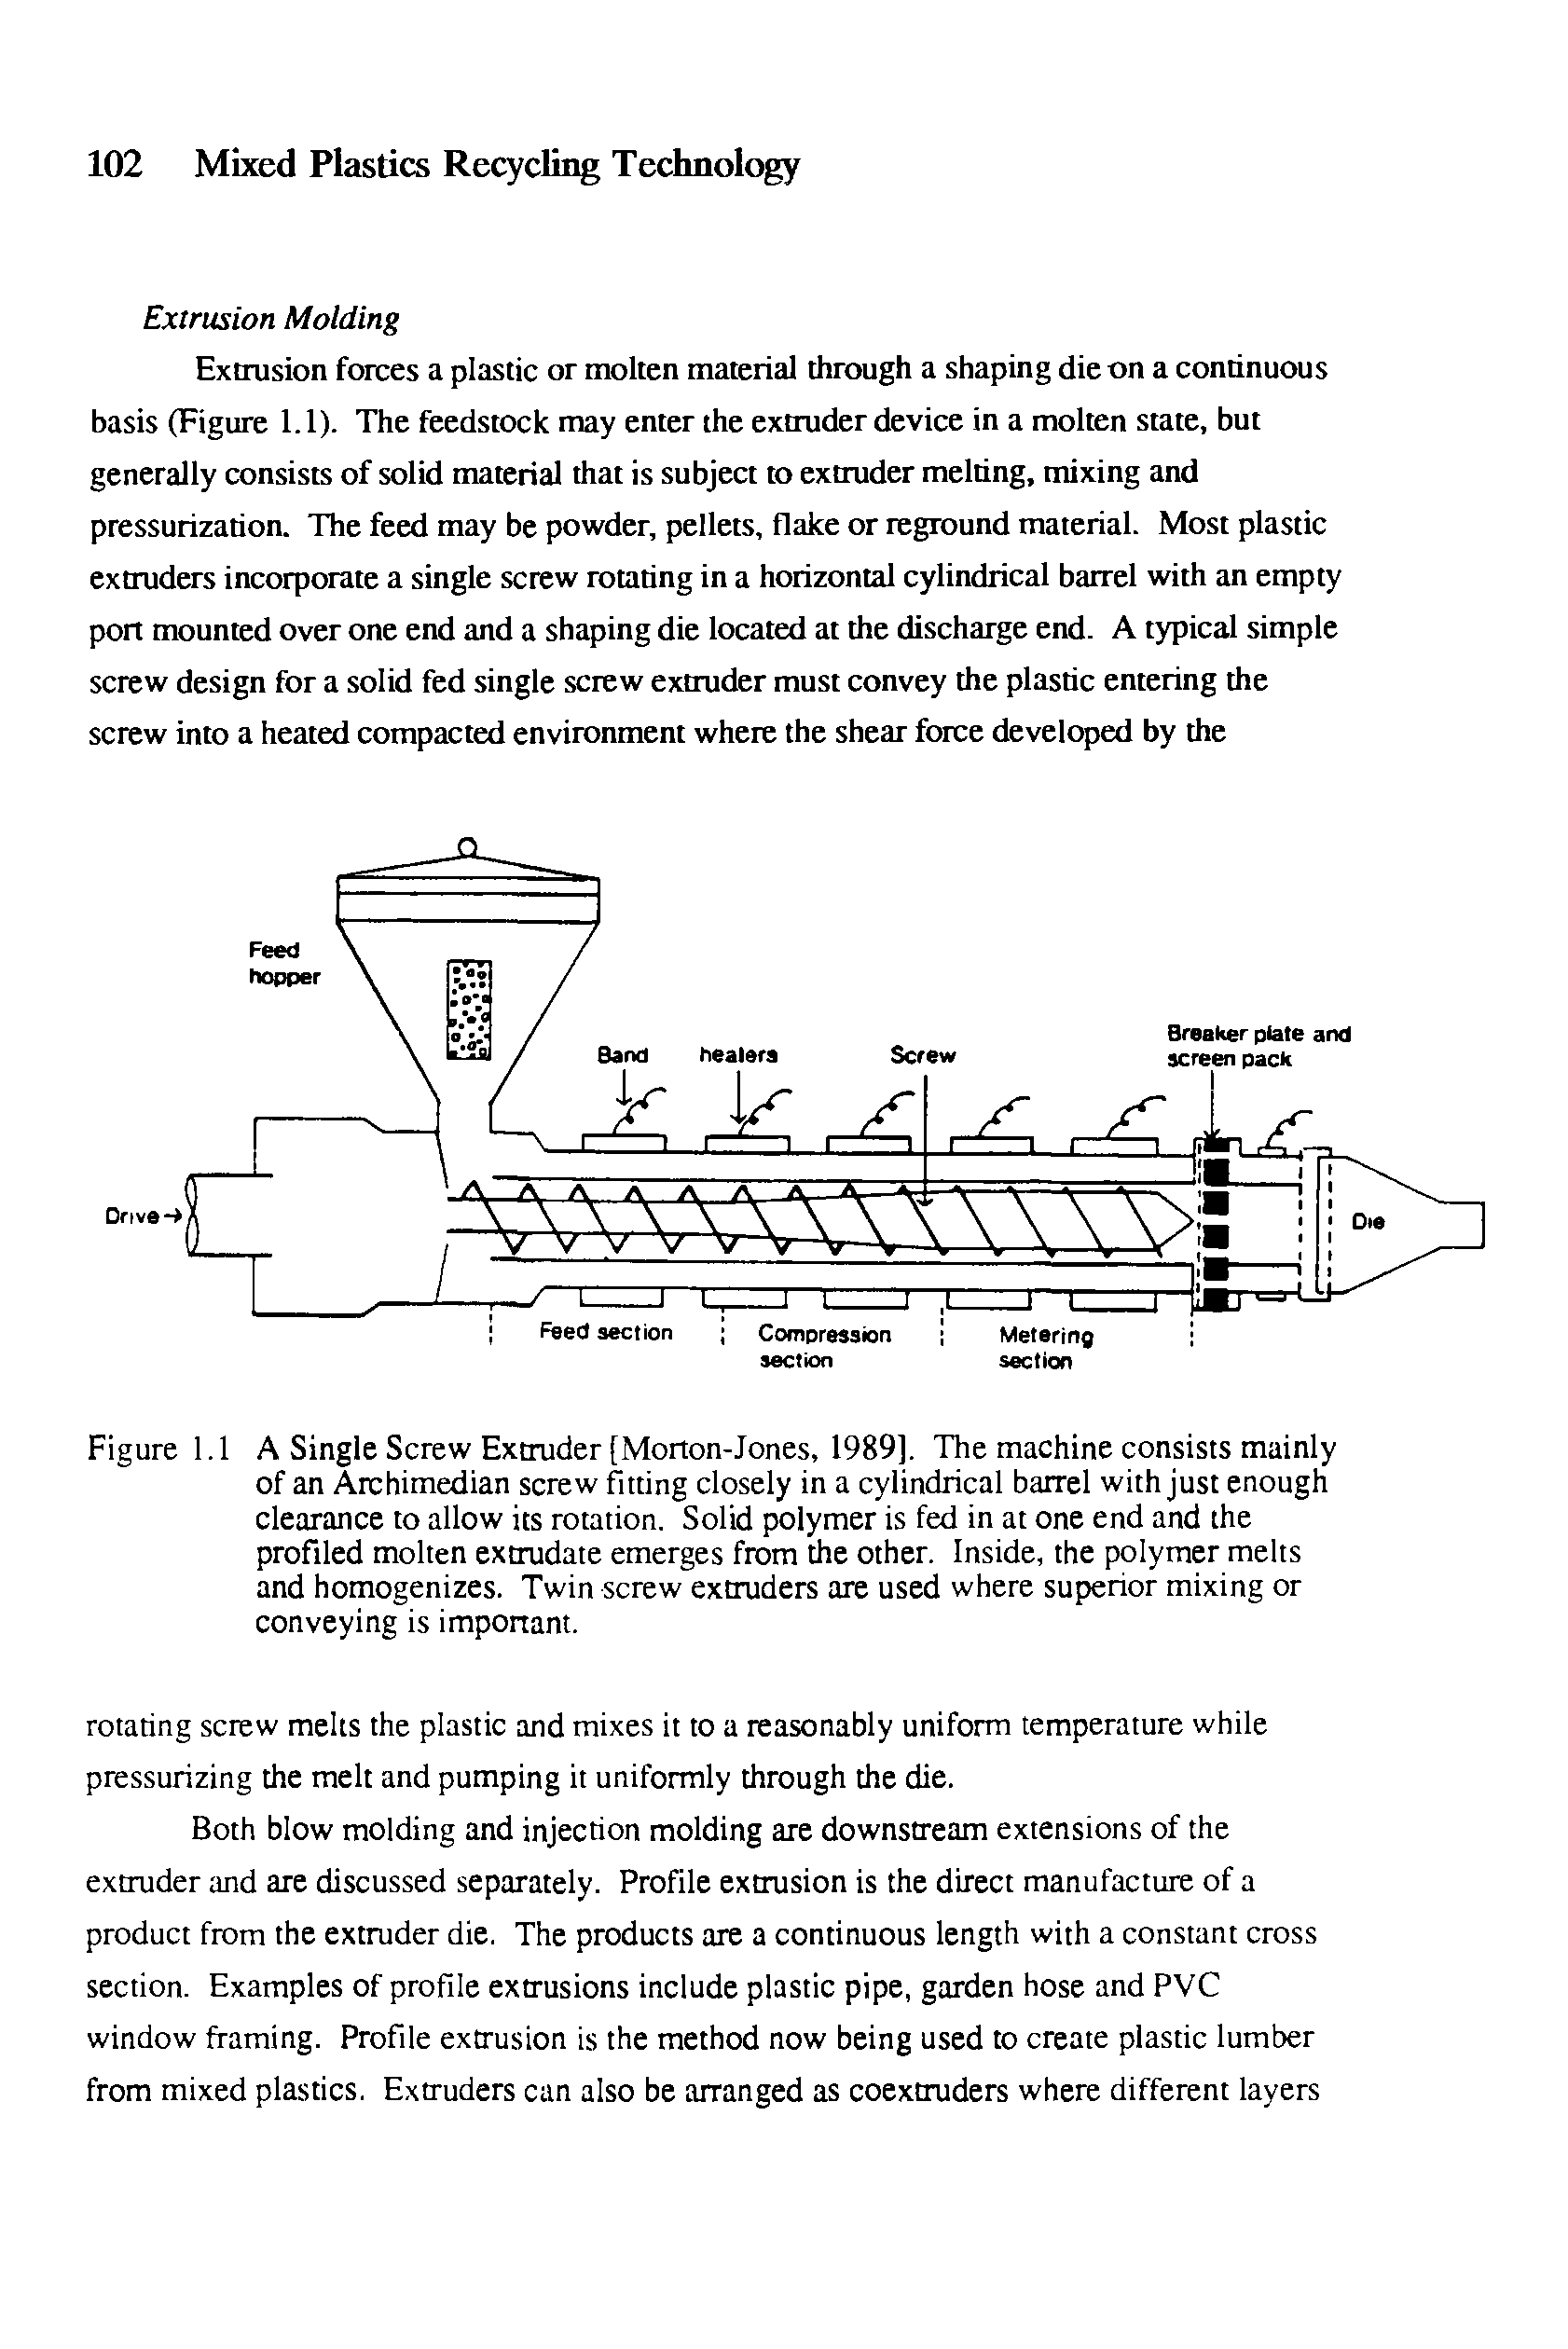 Figure 1.1 A Single Screw Extruder [Morton-Jones, 1989]. The machine consists mainly of an Archimedian screw fitting closely in a cylindrical barrel with just enough clearance to allow its rotation. Solid polymer is fed in at one end and the profiled molten extrudate emerges from the other. Inside, the polymer melts and homogenizes. Twin screw extruders are used where superior mixing or conveying is imponant.